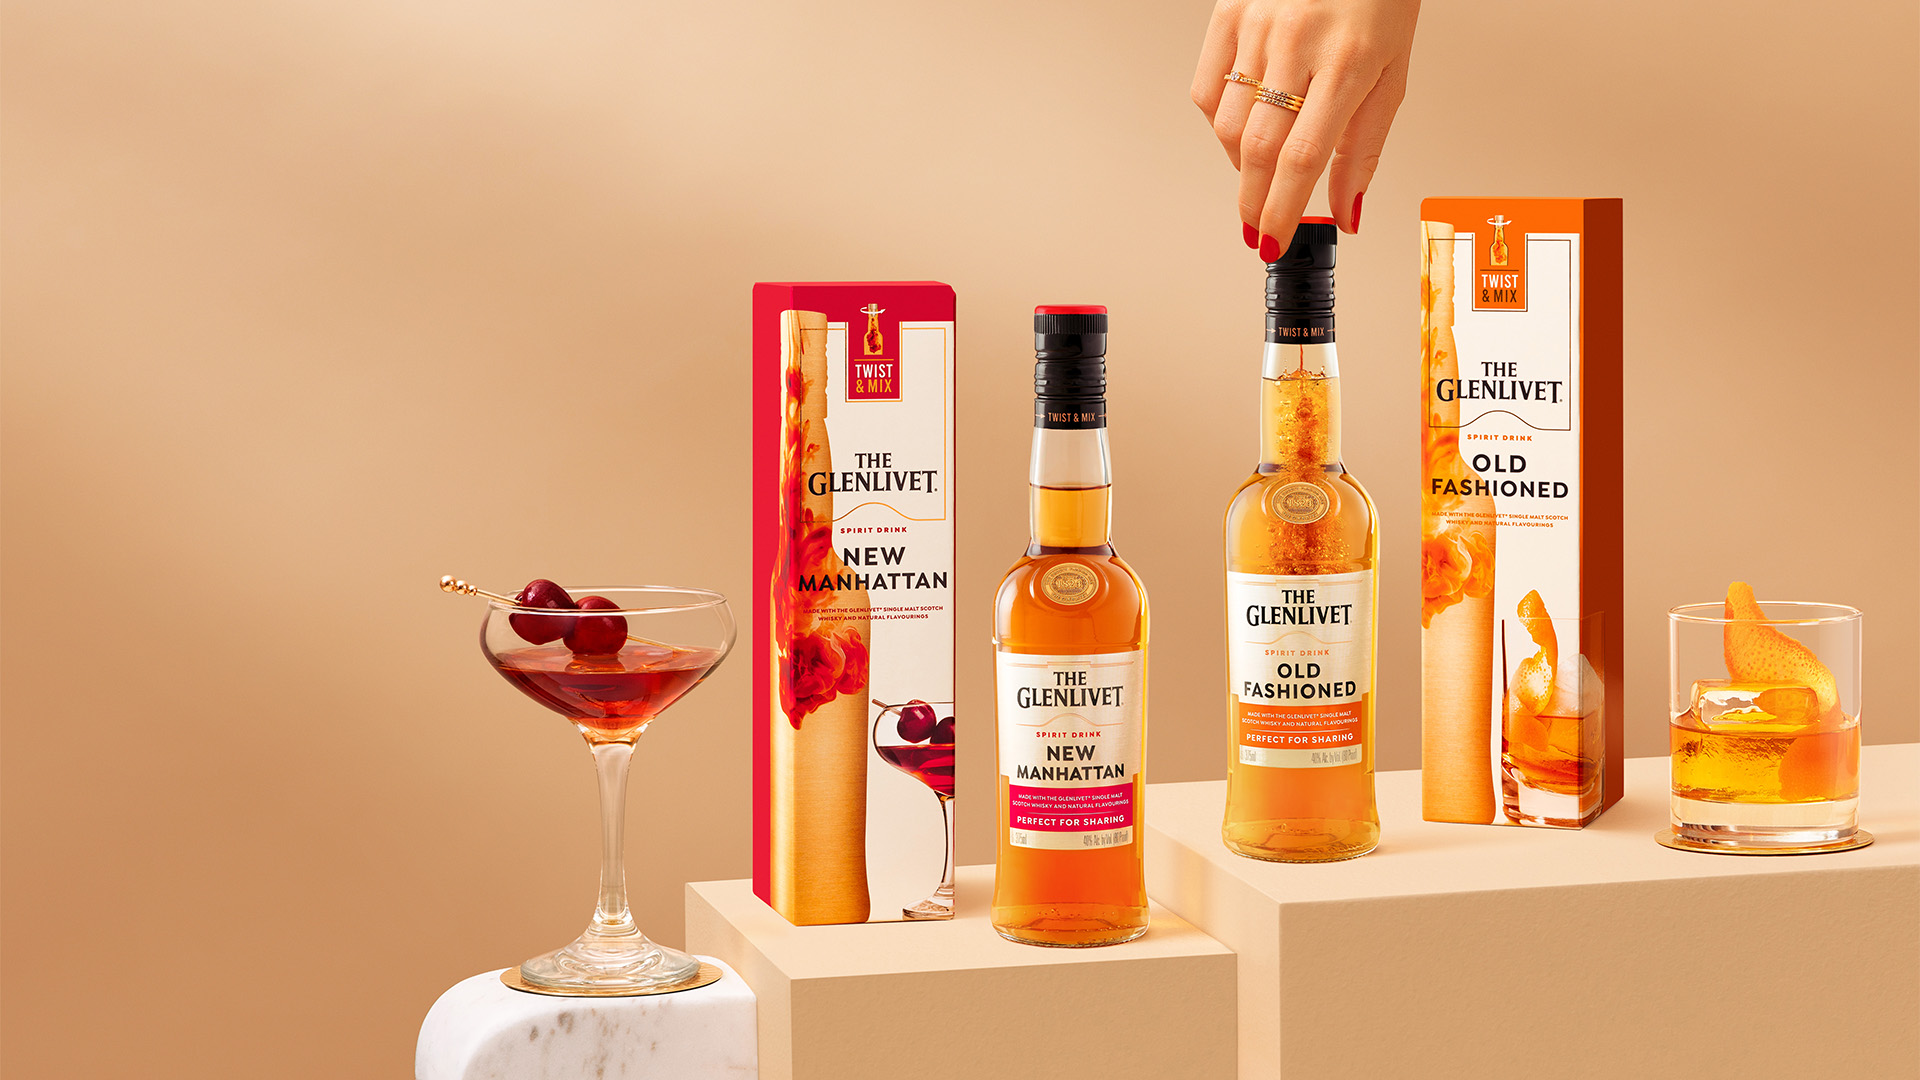 JDO Puts Its Twist & Mix on an Exciting New Innovation From the Glenlivet